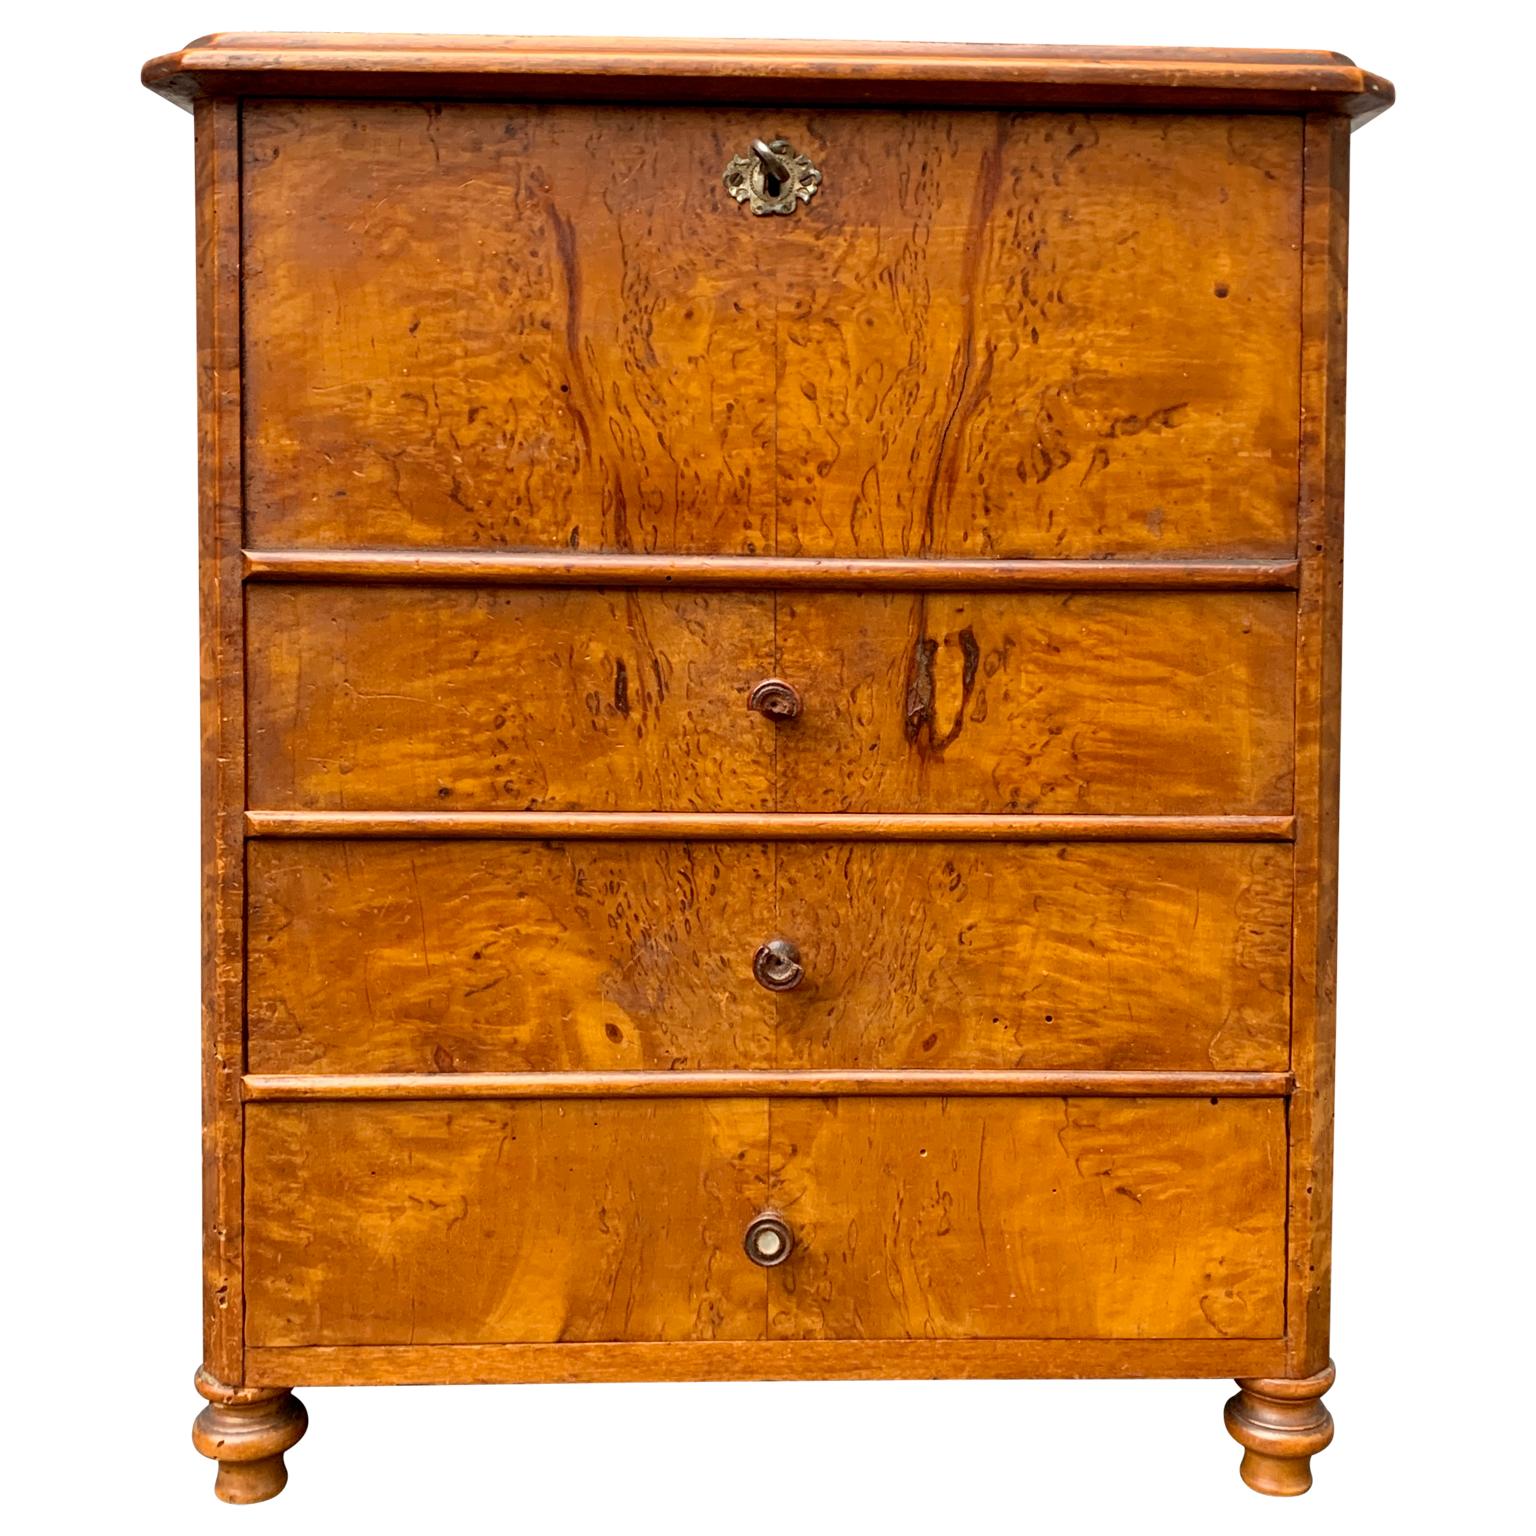 A Swedish 19th Century Biedermeier 3-drawer chest and writing desk with drop down top and a series of small drawers inside. Original antique wooden handles and original locks and 2 keys. 
This miniature in burl birch was most certainly used as a